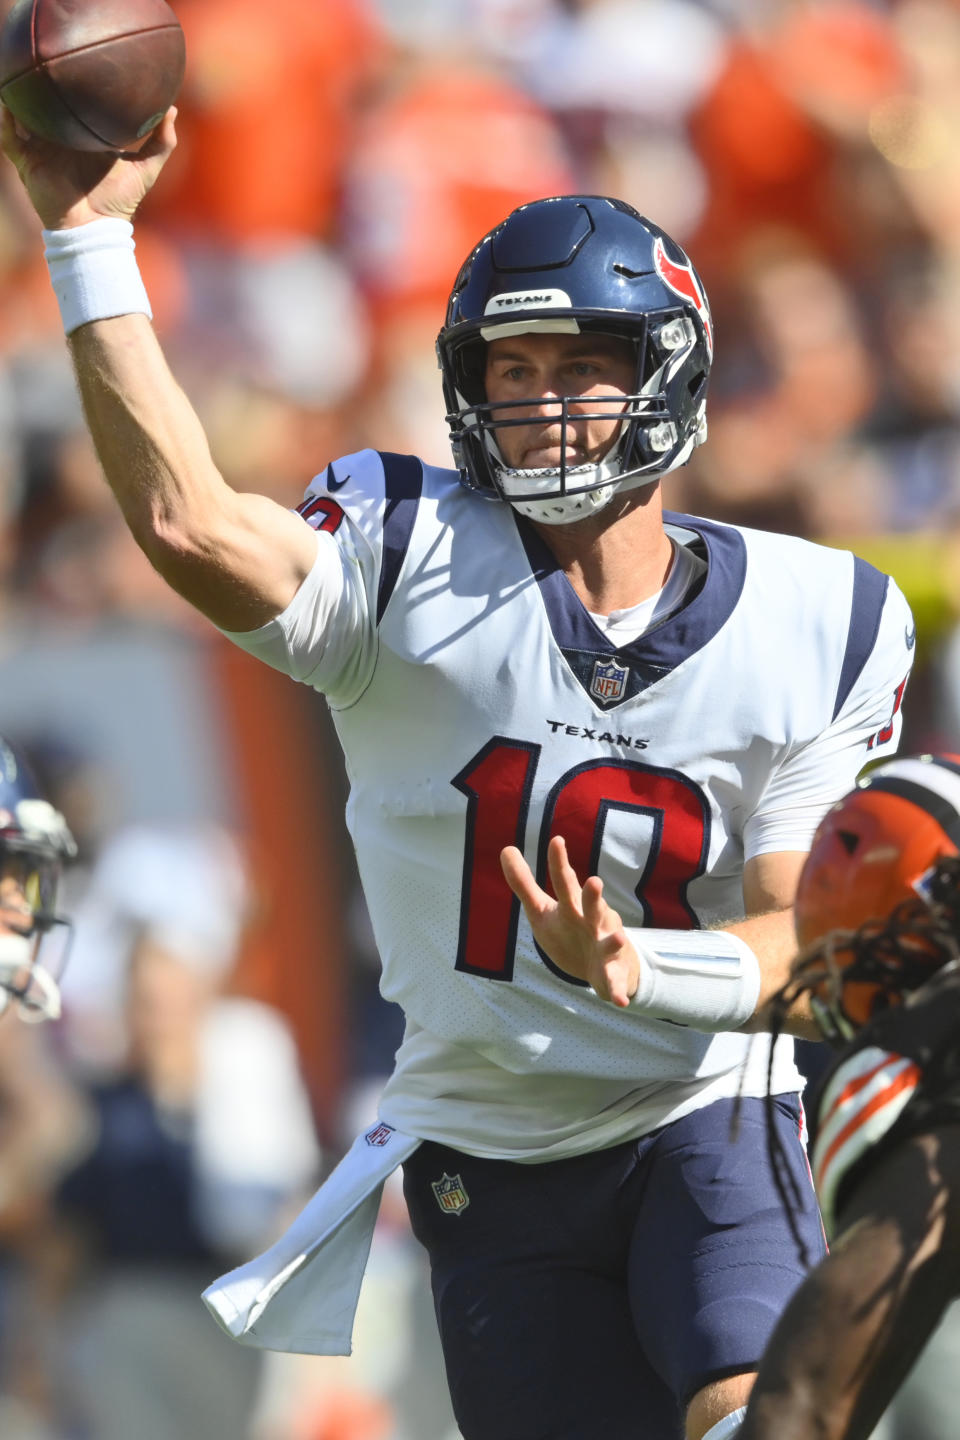 Houston Texans quarterback Davis Mills throws during the second half of an NFL football game against the Cleveland Browns, Sunday, Sept. 19, 2021, in Cleveland. (AP Photo/David Richard)